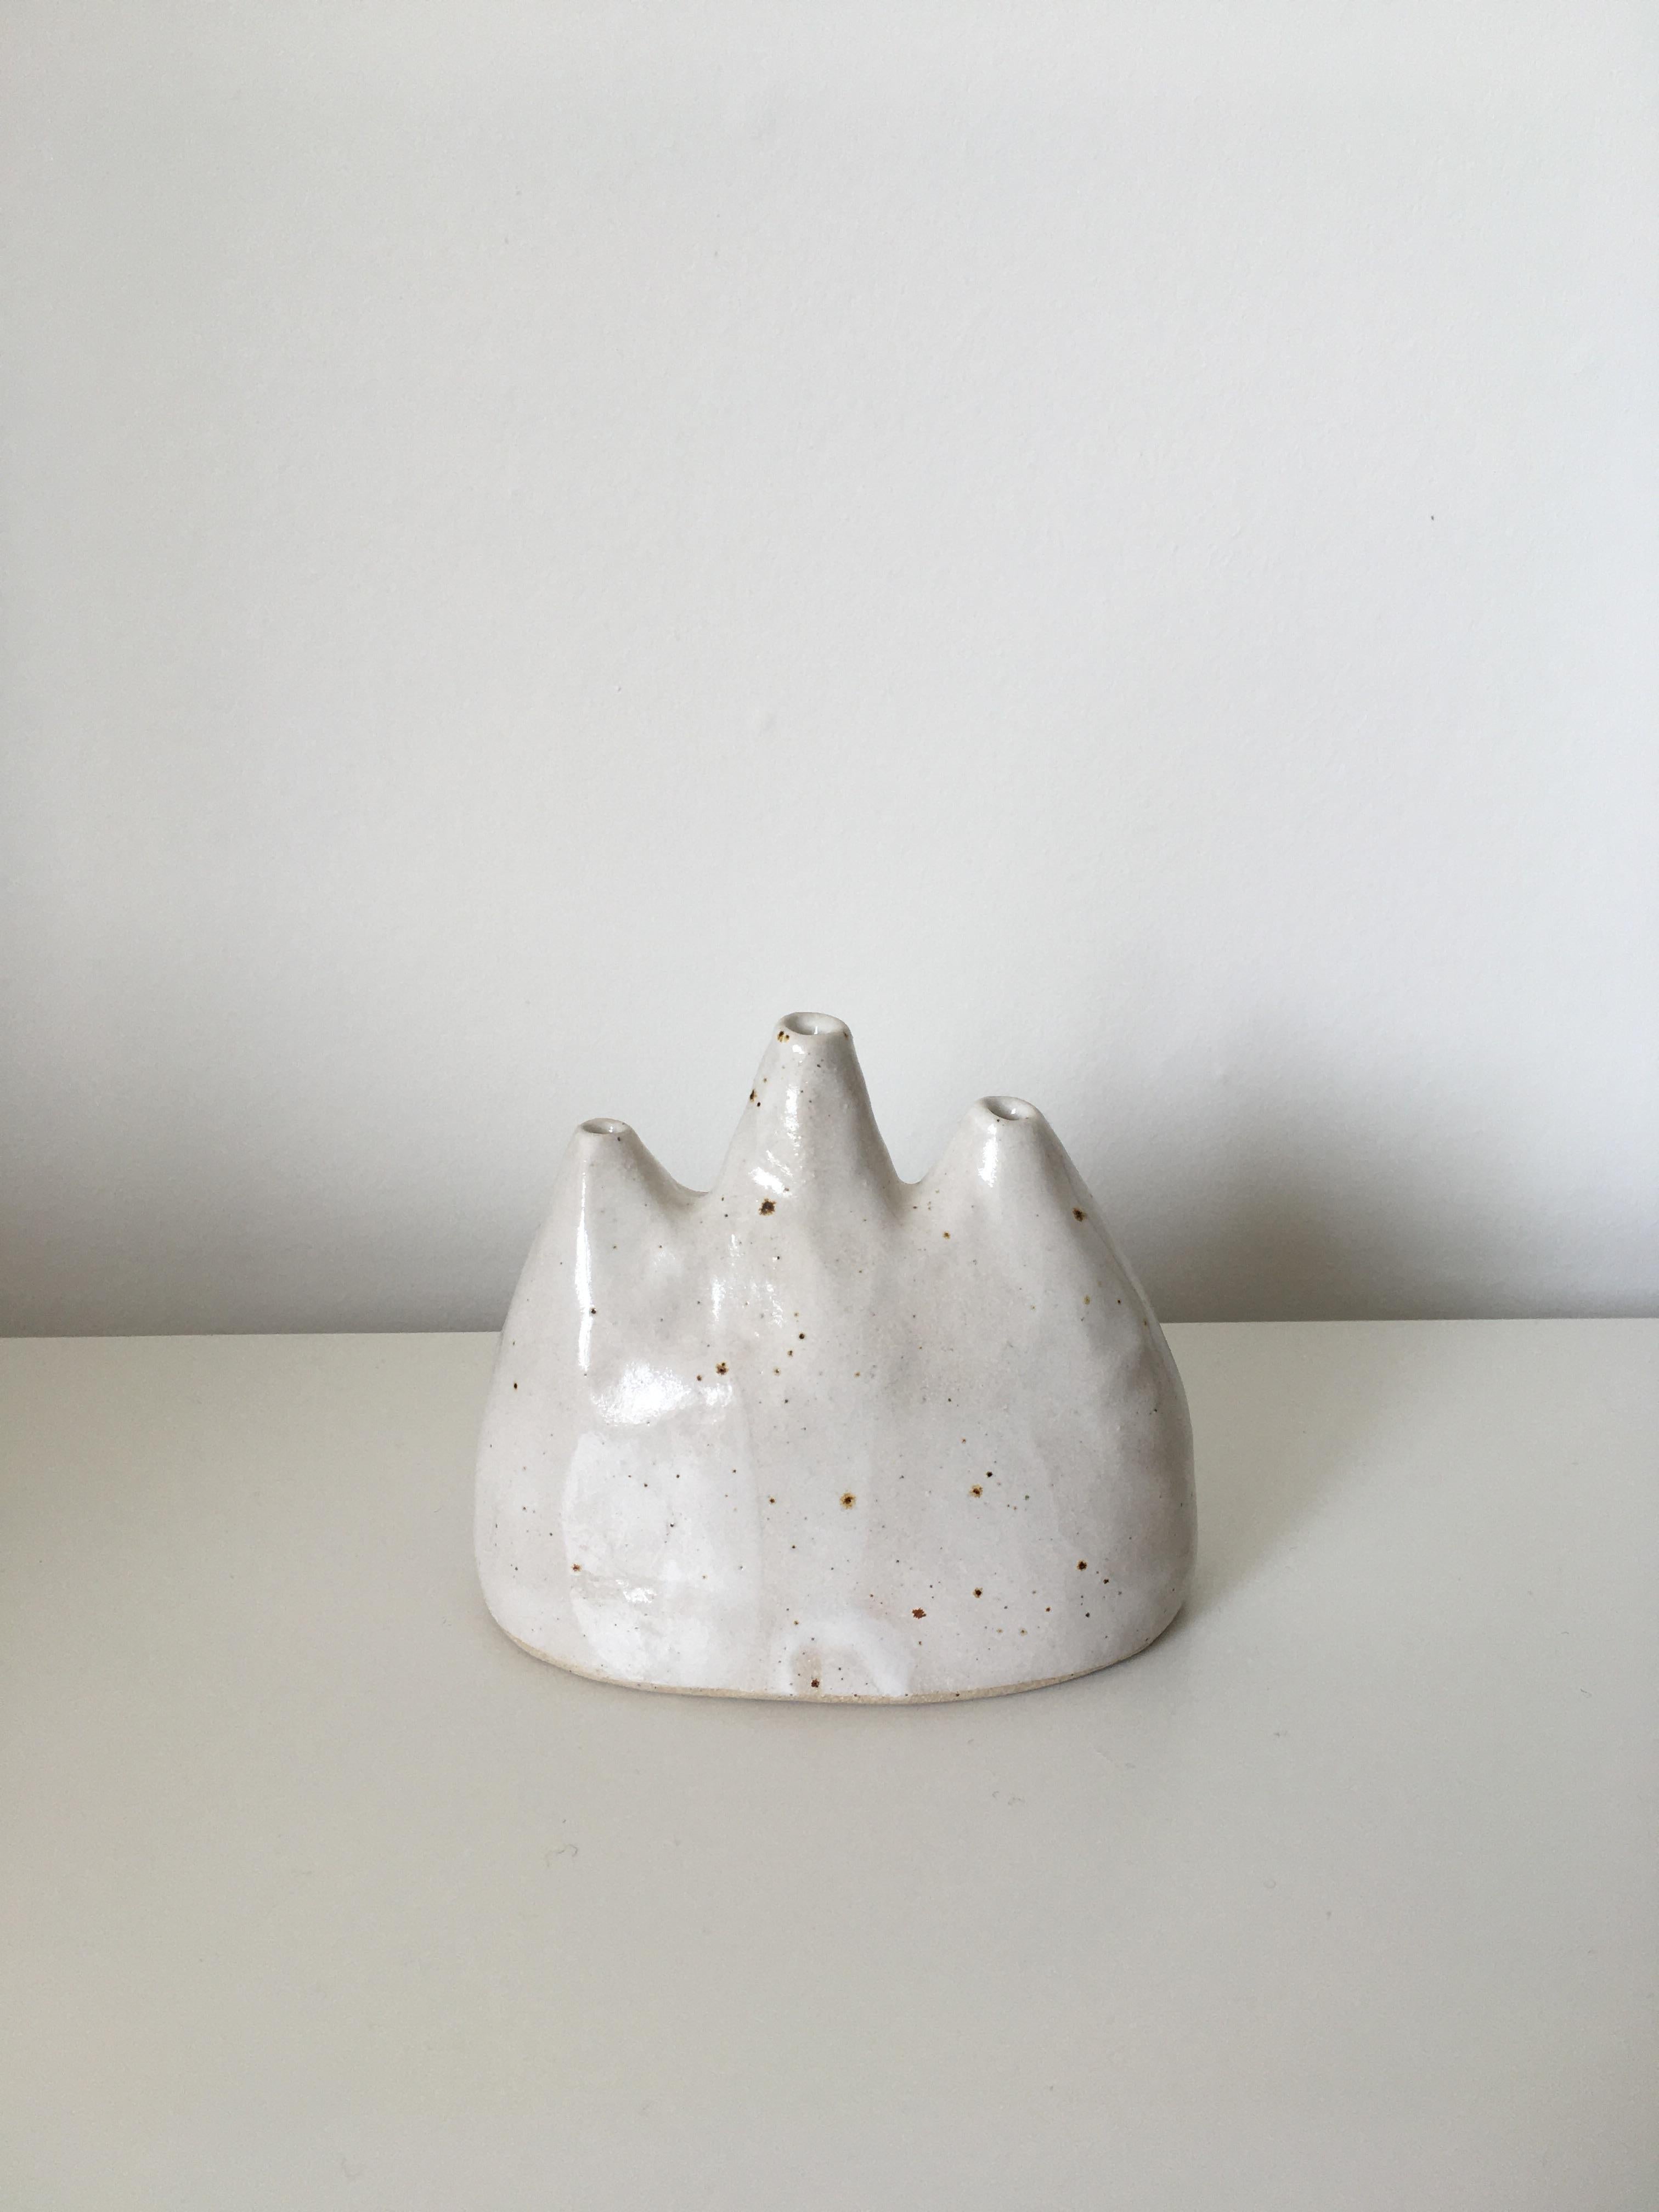 No.18 stoneware sculpture, tonfisk by Ciona Lee
One of a kind
Dimensions: W 12 x D 7 x H 10 cm
Materials: speckled stoneware, shiny white glaze
Variations of size and colour available,

Tonfisk is the ceramic practice by Ciona Lee, a